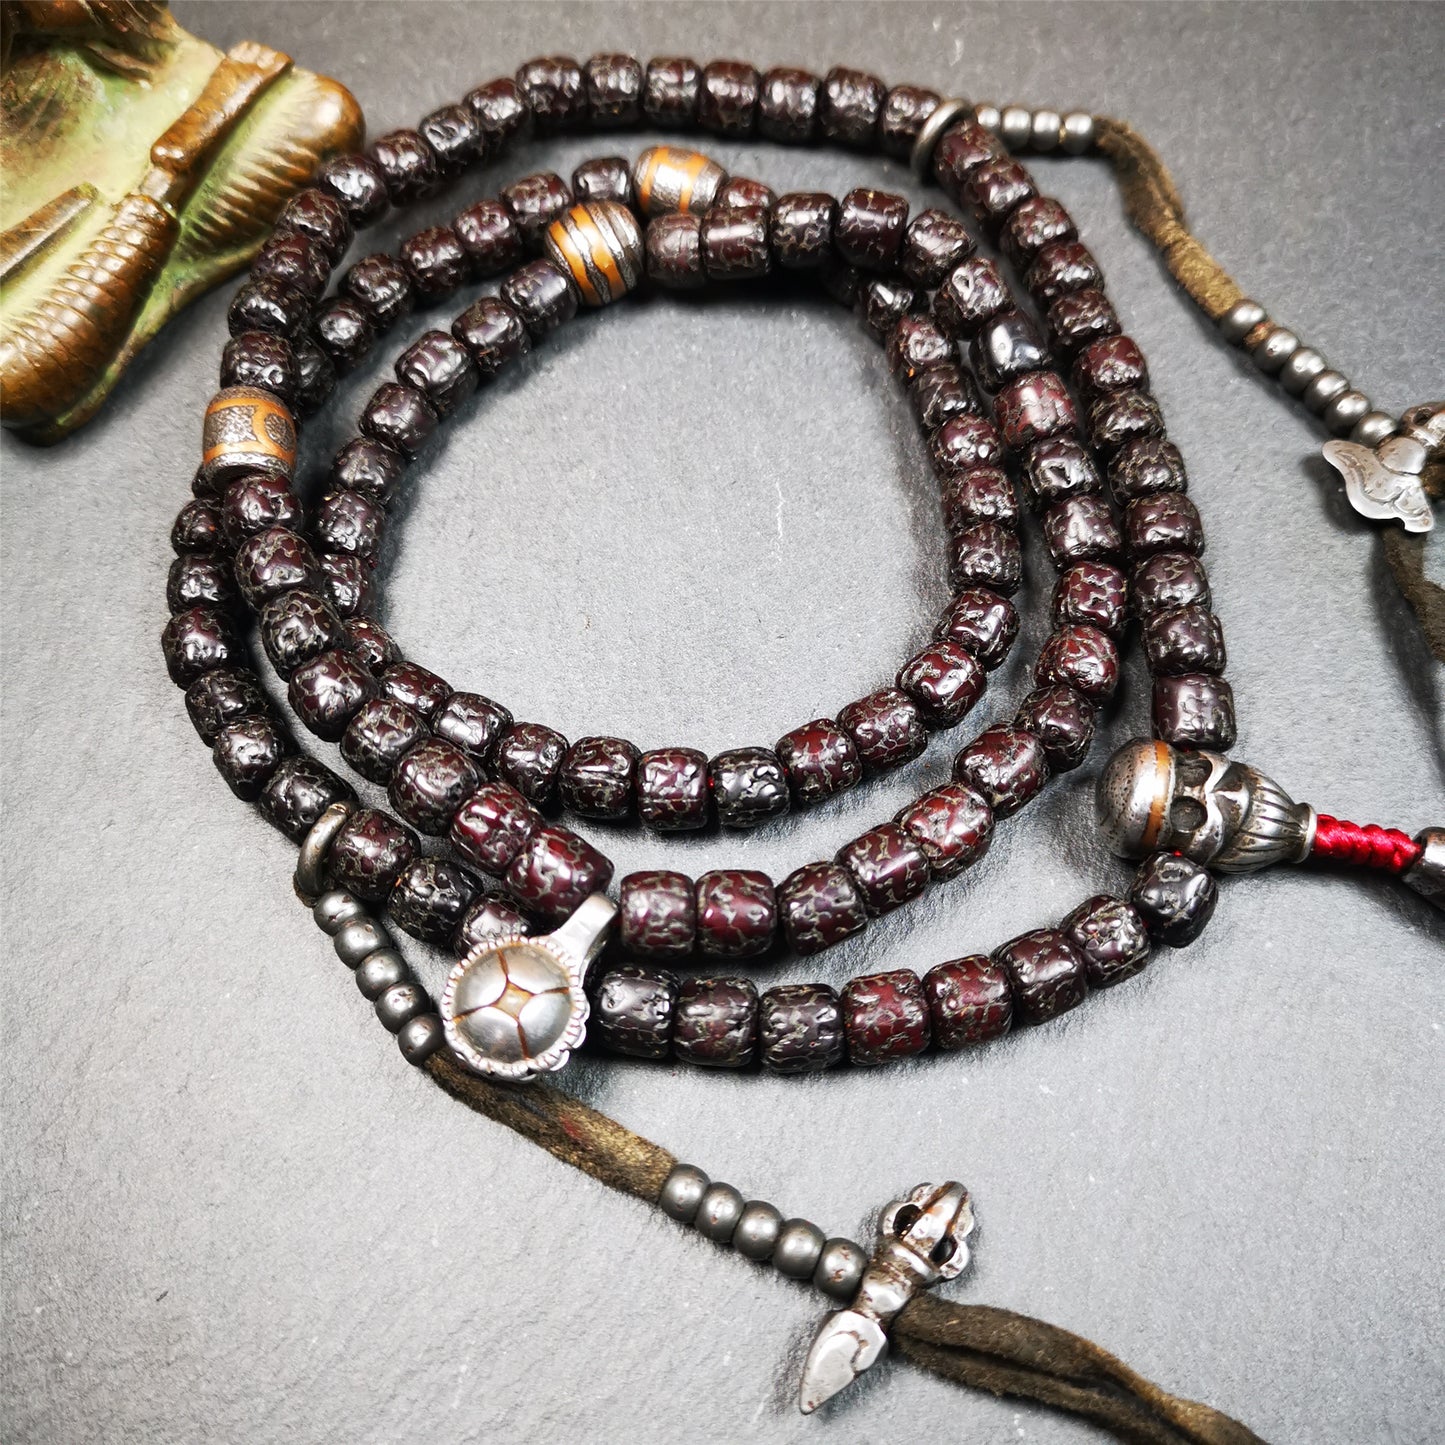 This old rudraksha mala was handmade from tibetan crafts man in Baiyu County. It's composed of 108 pcs 8mm rudraksha beads,with cold iron beads,1 pair of bead counters,guru bead,and dzi bead pendant.